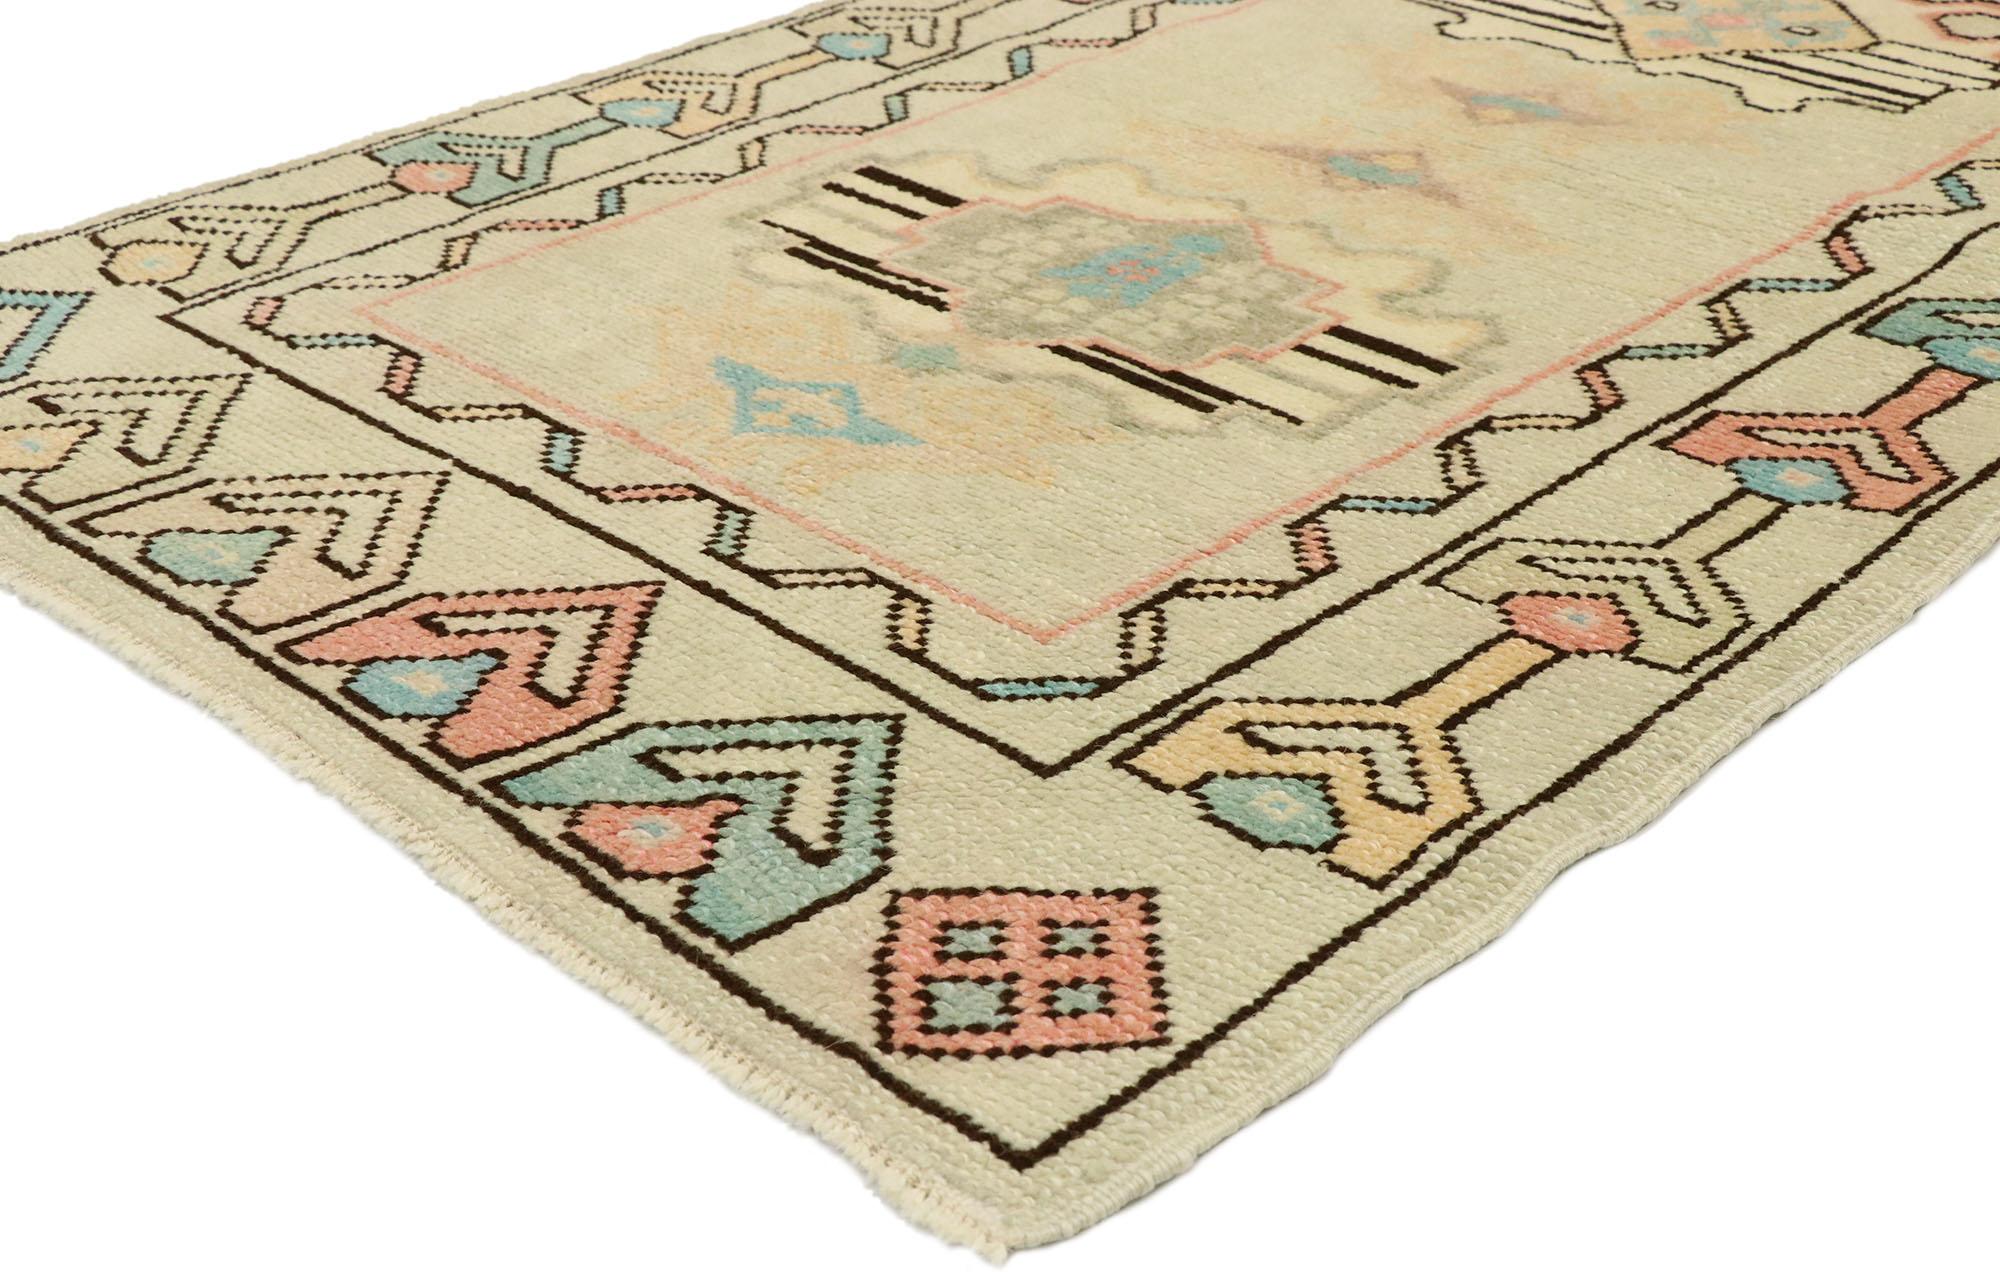 52926, vintage Turkish Oushak rug with Romantic Georgian cottage French style. Soft, bespoke vibes meet French country cottage style in this hand knotted wool vintage Turkish Oushak rug. The champagne-beige antique washed field beautifully displays